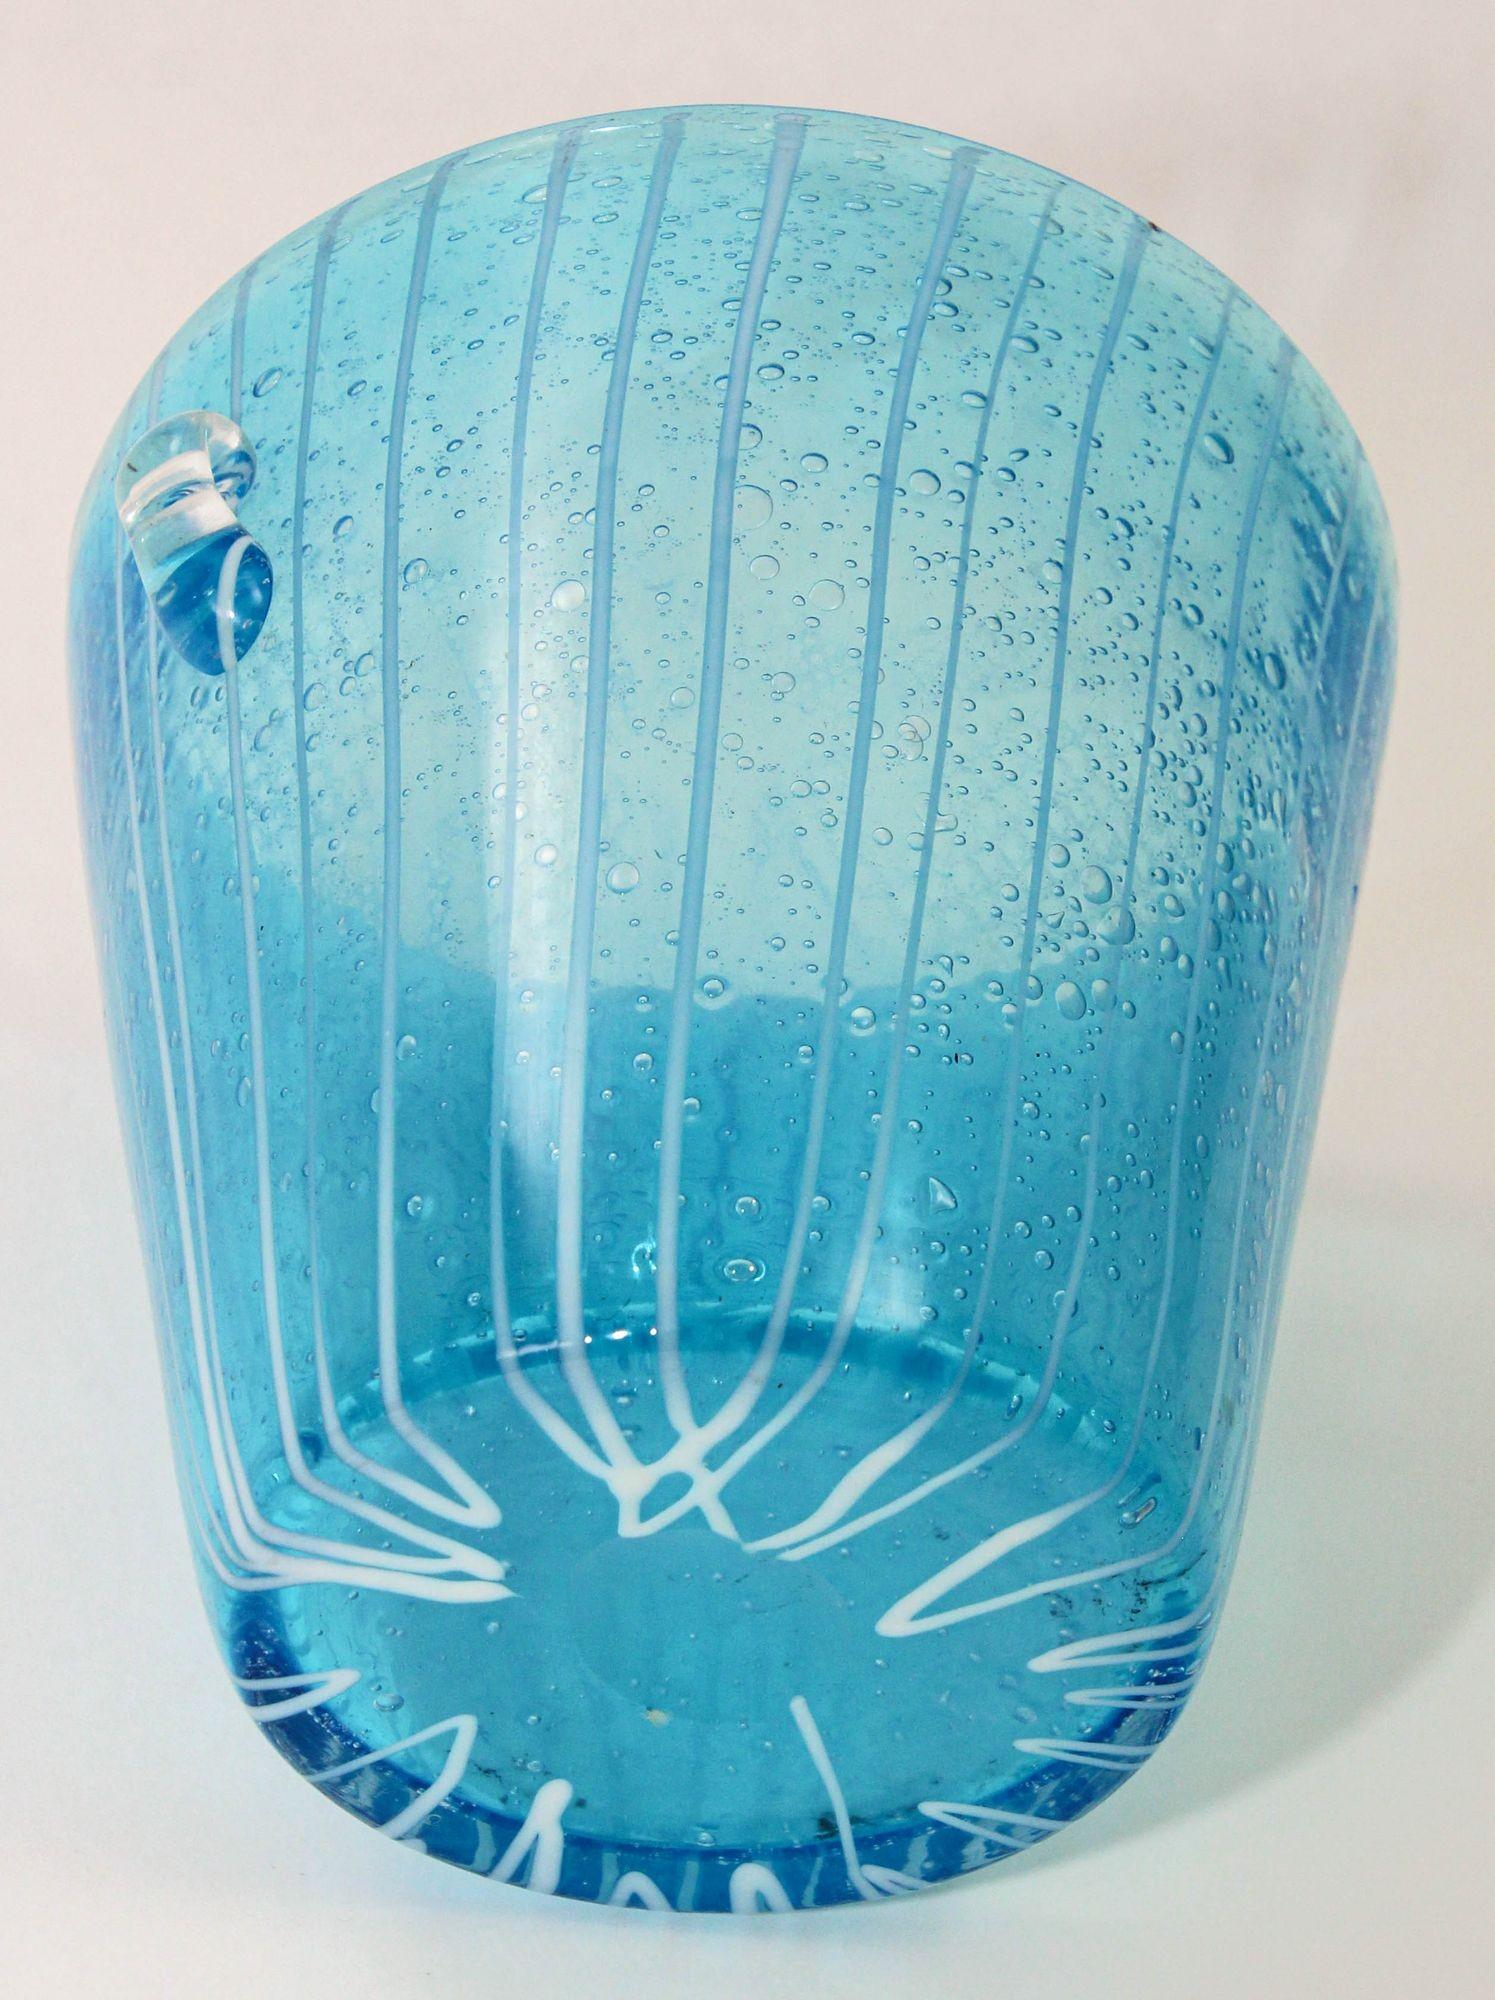 Hand-Crafted Murano Venini Venetian Ice Bucket Blue and White Art Glass 1980s For Sale